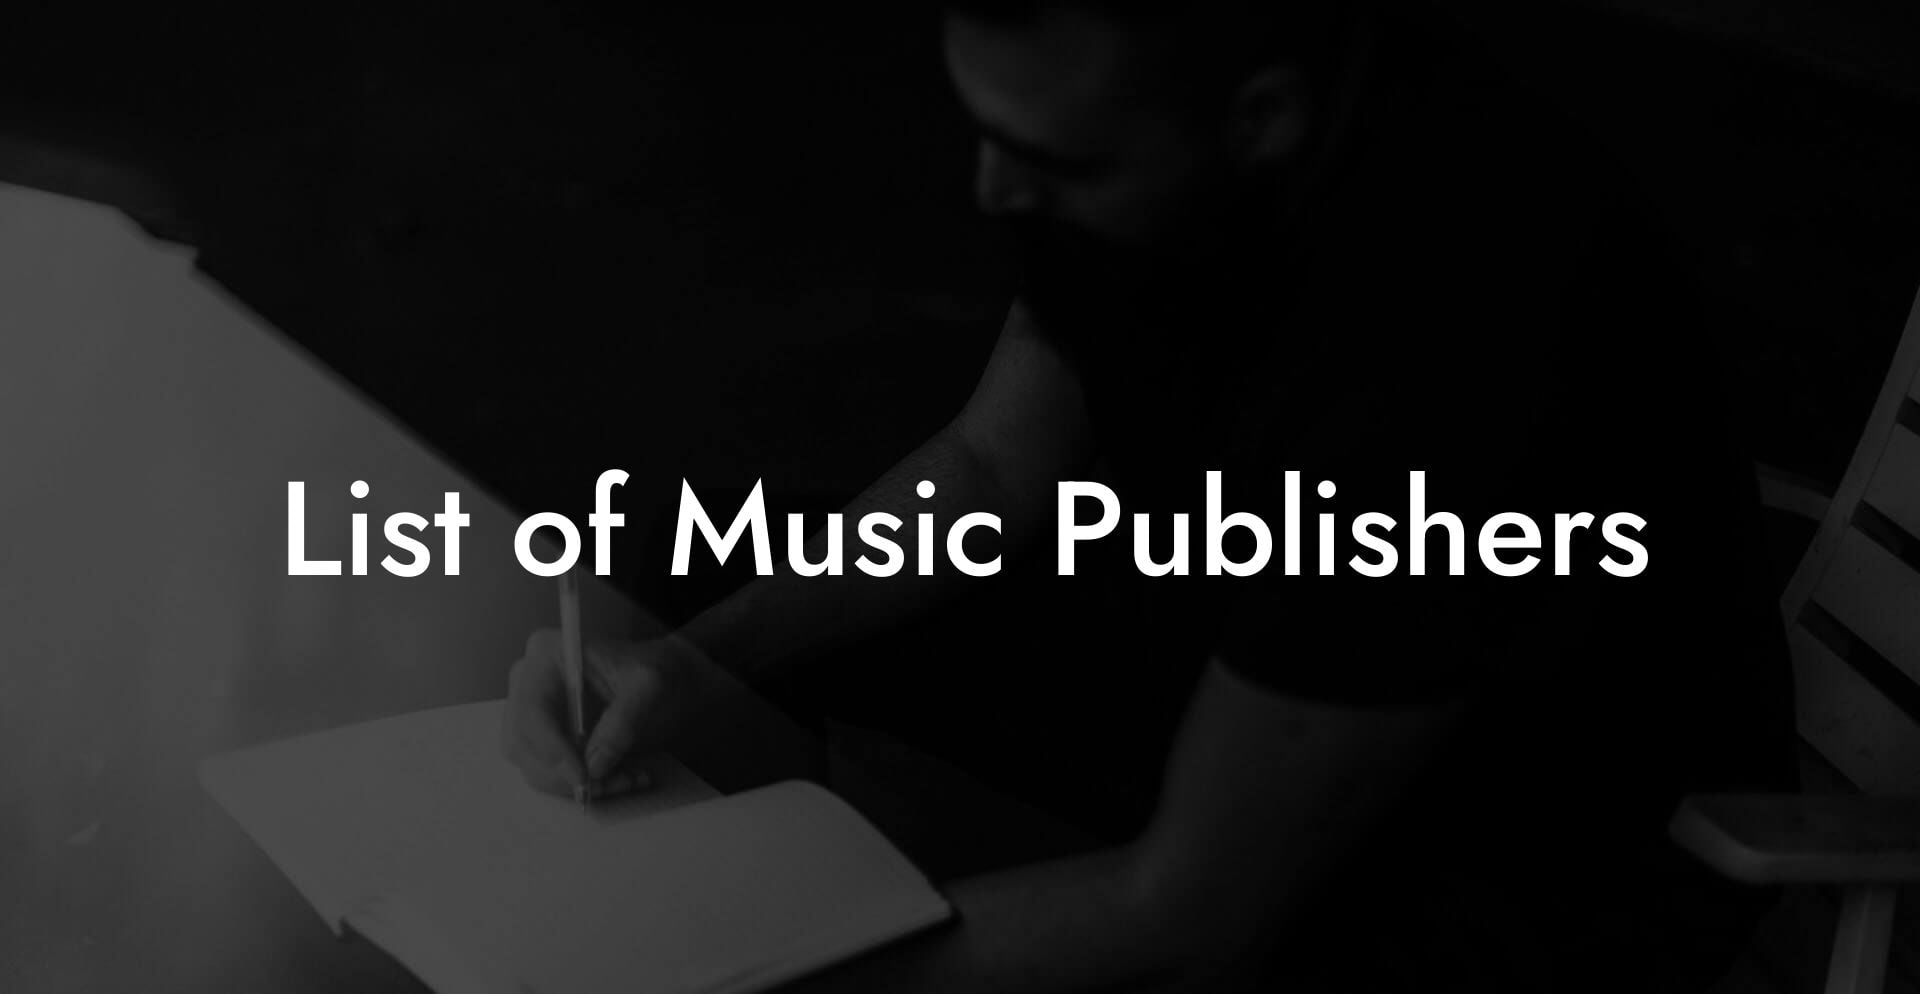 List of Music Publishers